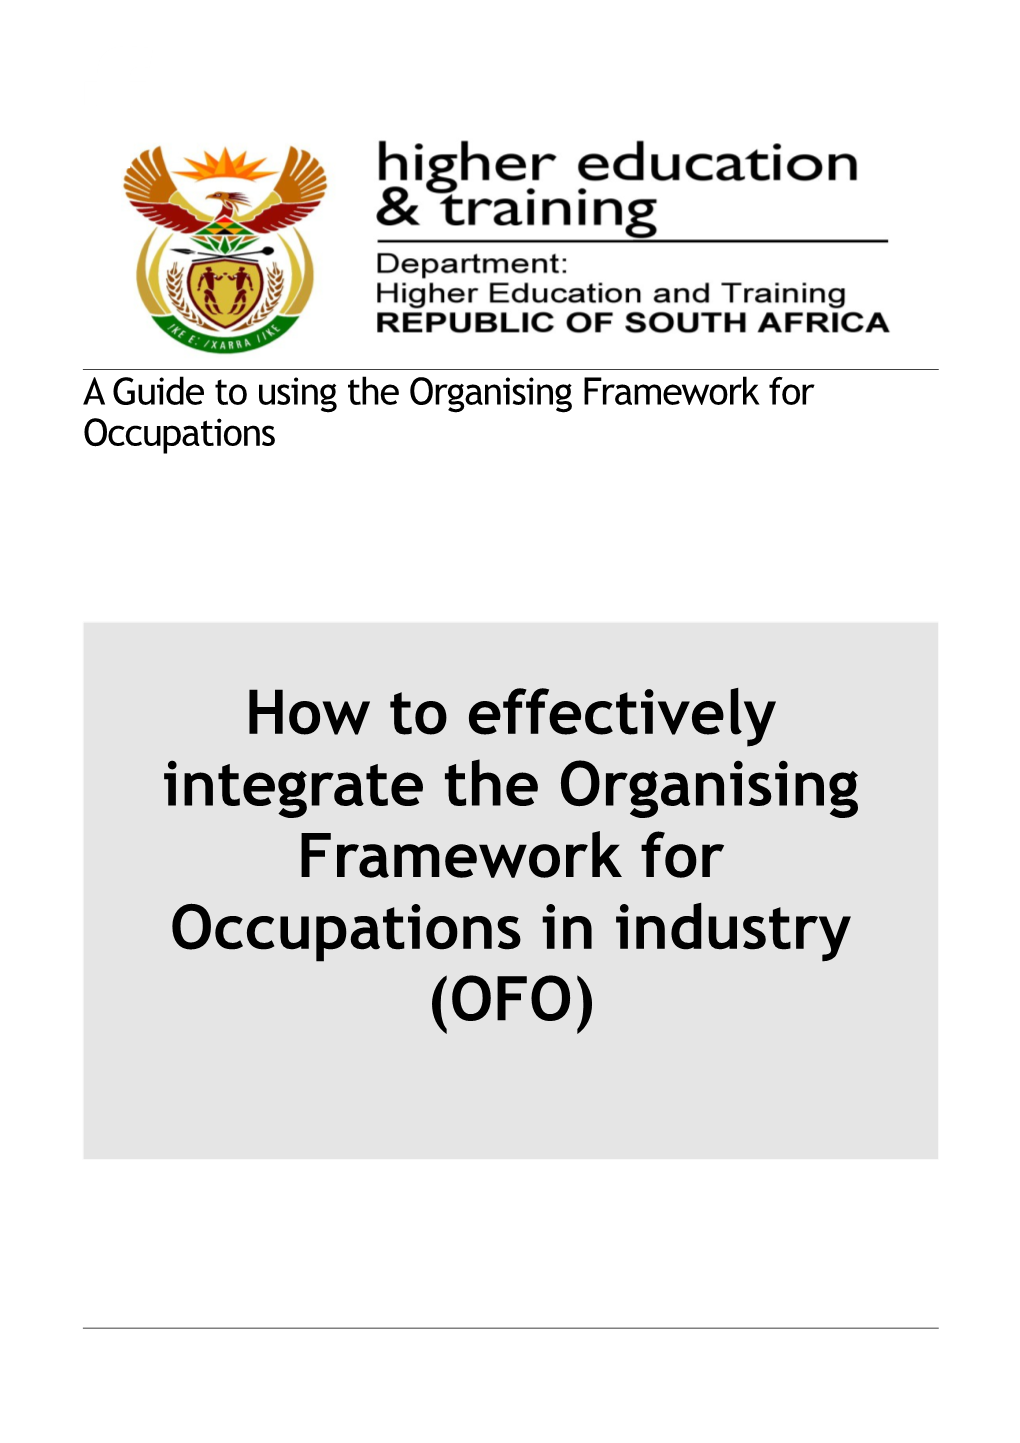 A Guide to Using the Organising Framework for Occupations